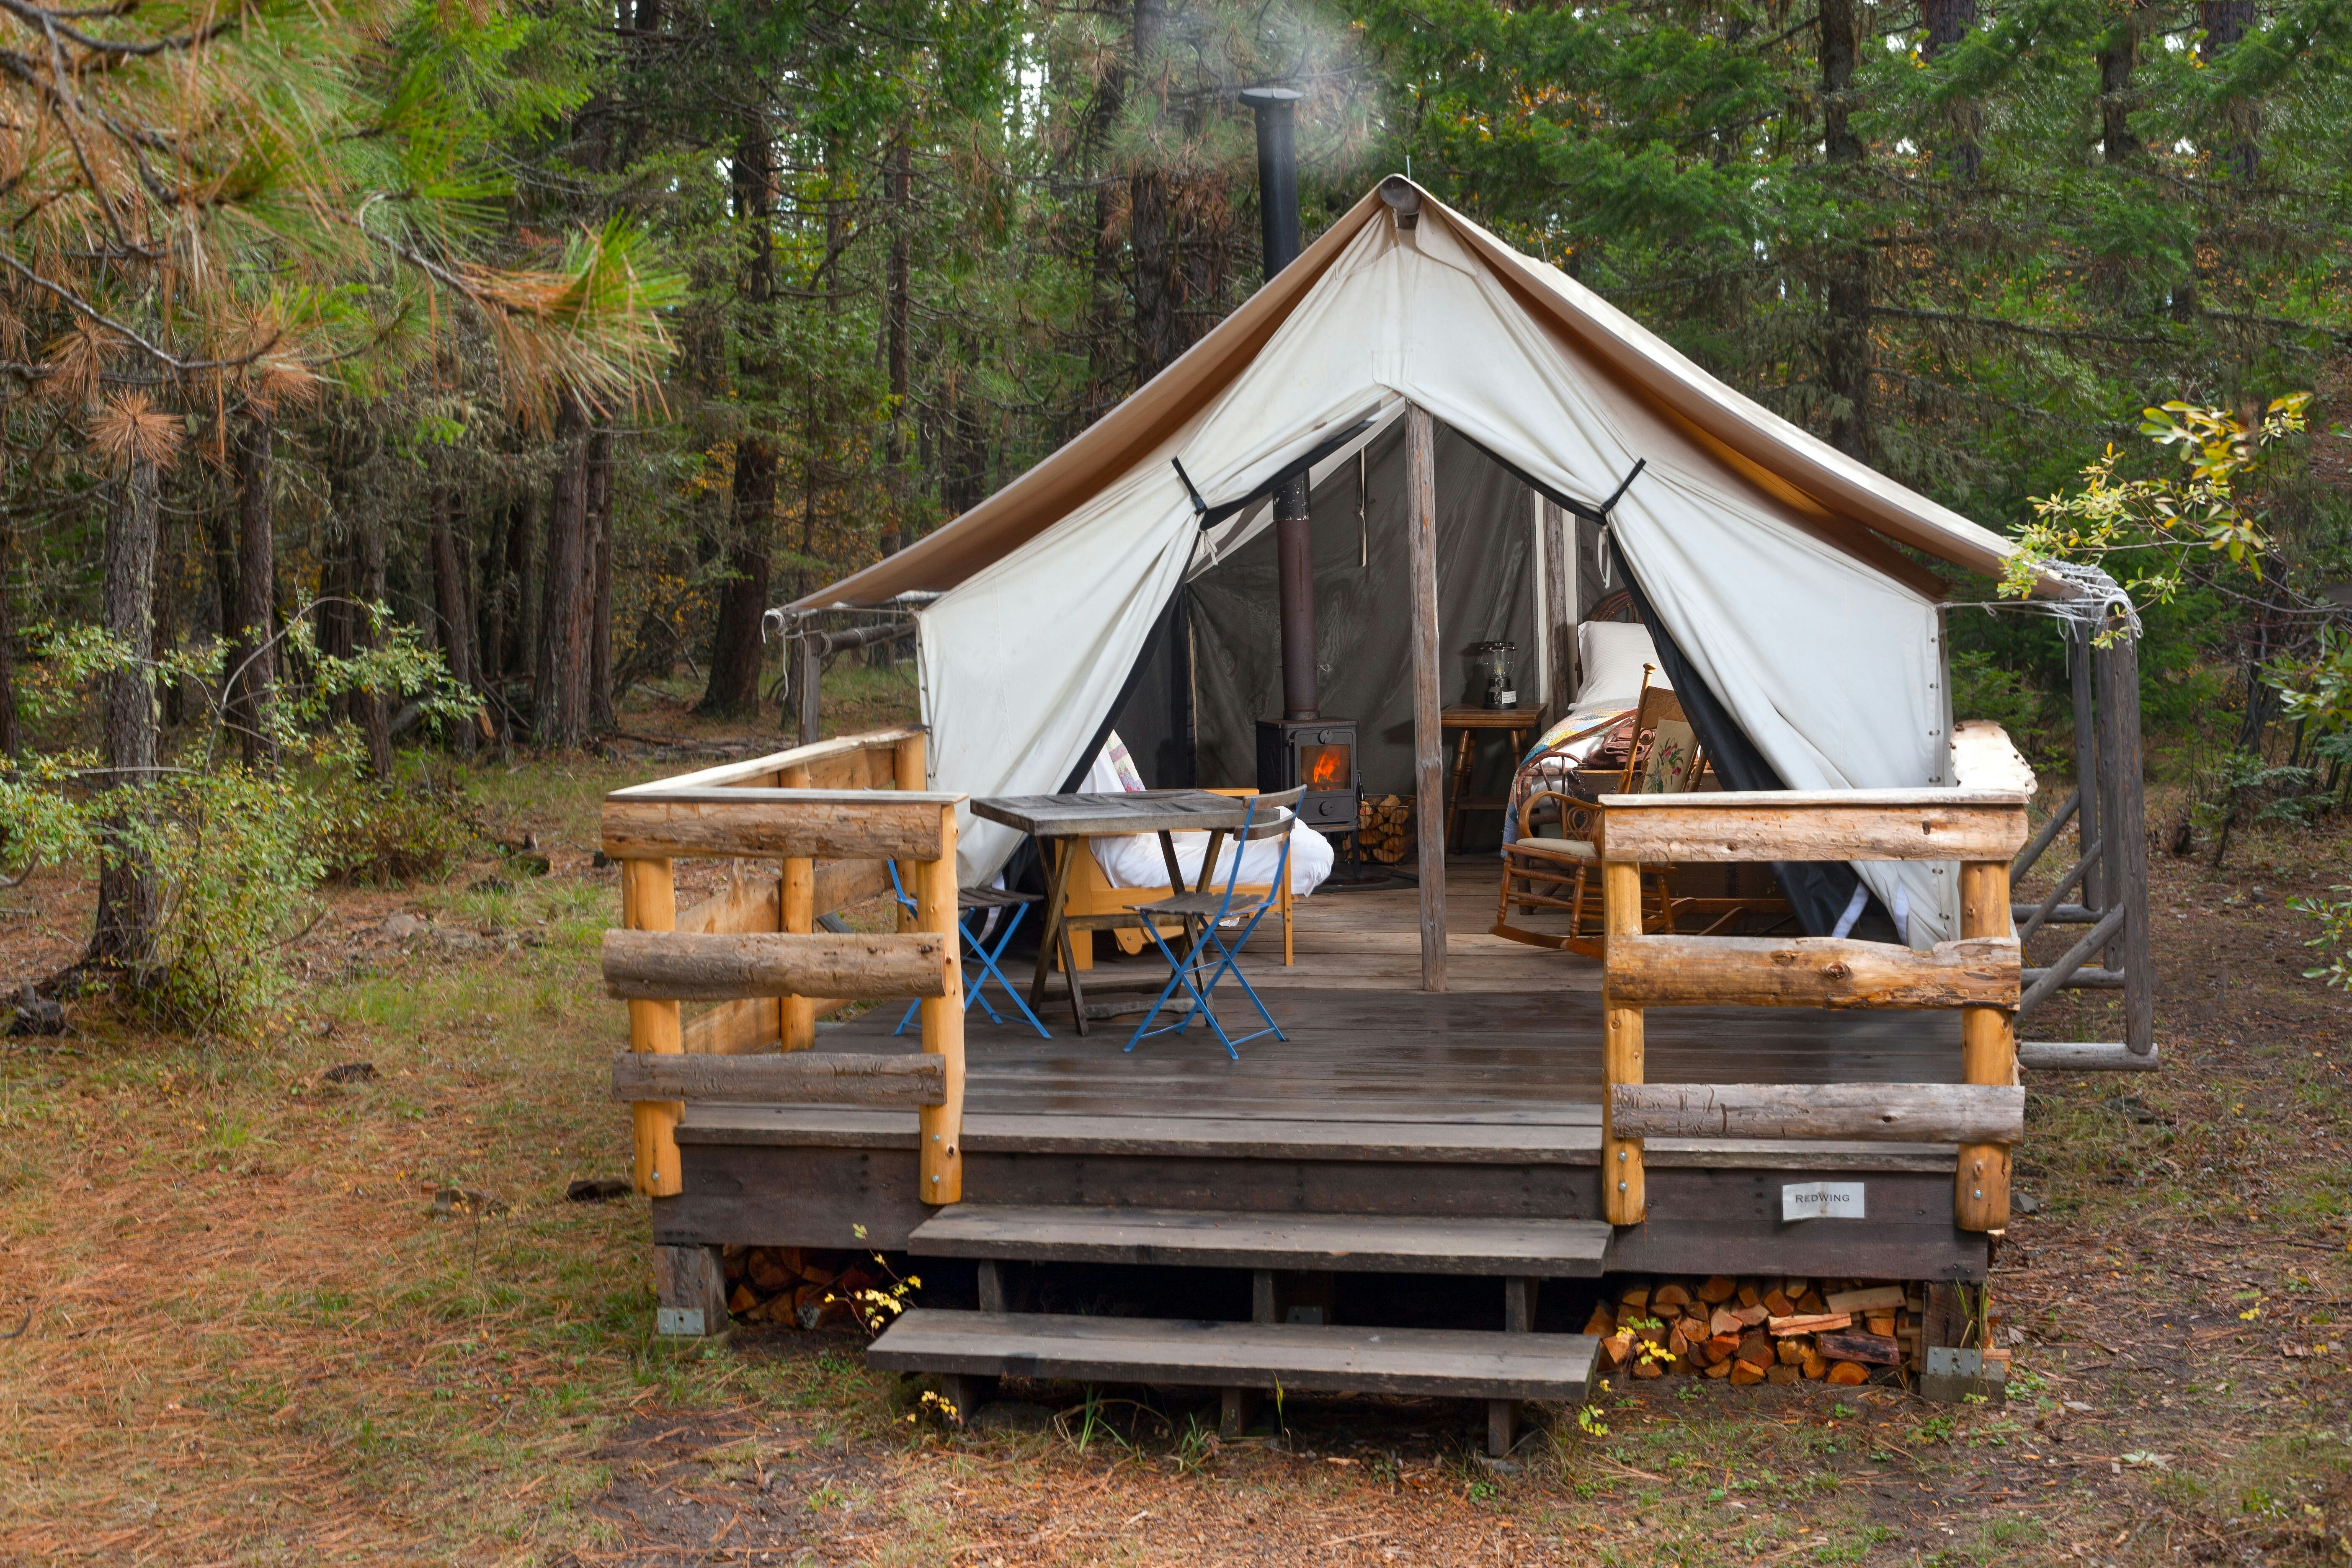 A canvas glamping tent at Willow-Witt Ranch in Ashland, Oregon is outfitted with a woodburning cast iron stove, a vintage rocking chair, and a bed covered with a antique-style quilt. A table with blue folding chairs sits on the porch, formed by a wooden platform on which the tent sits. Logs are stored underneath and a pine forest is all around.